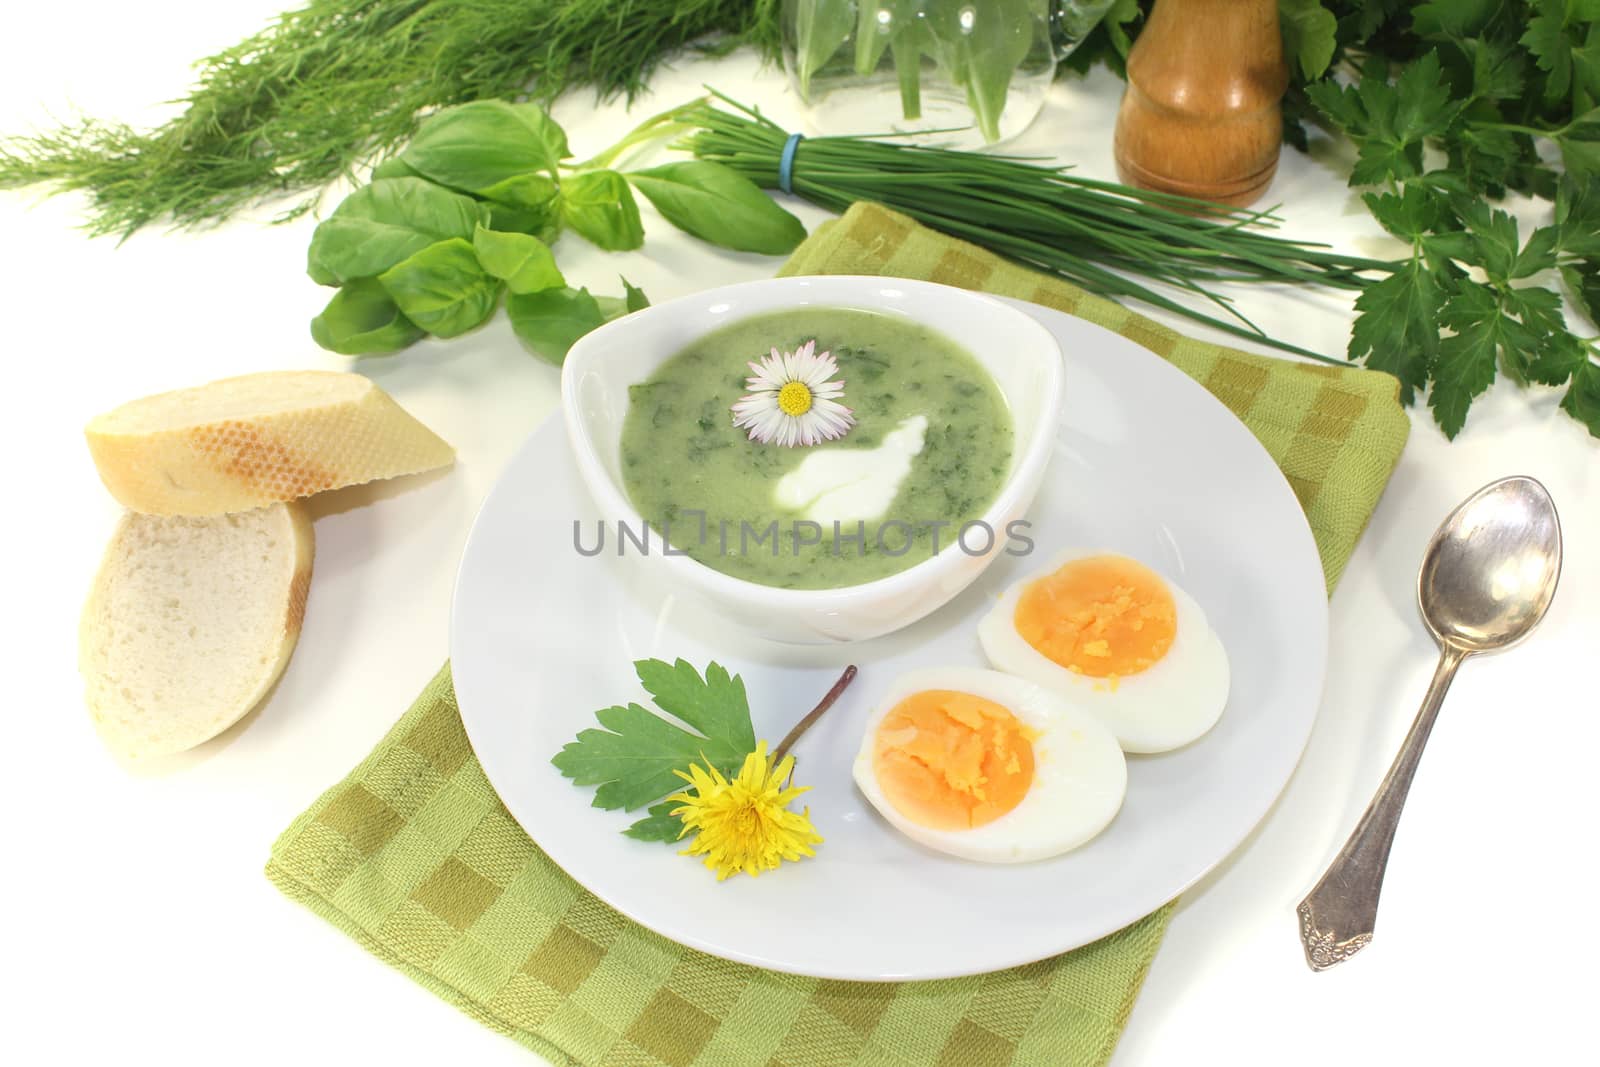 fresh herbs soup with eggs, a dollop of cream and daisy